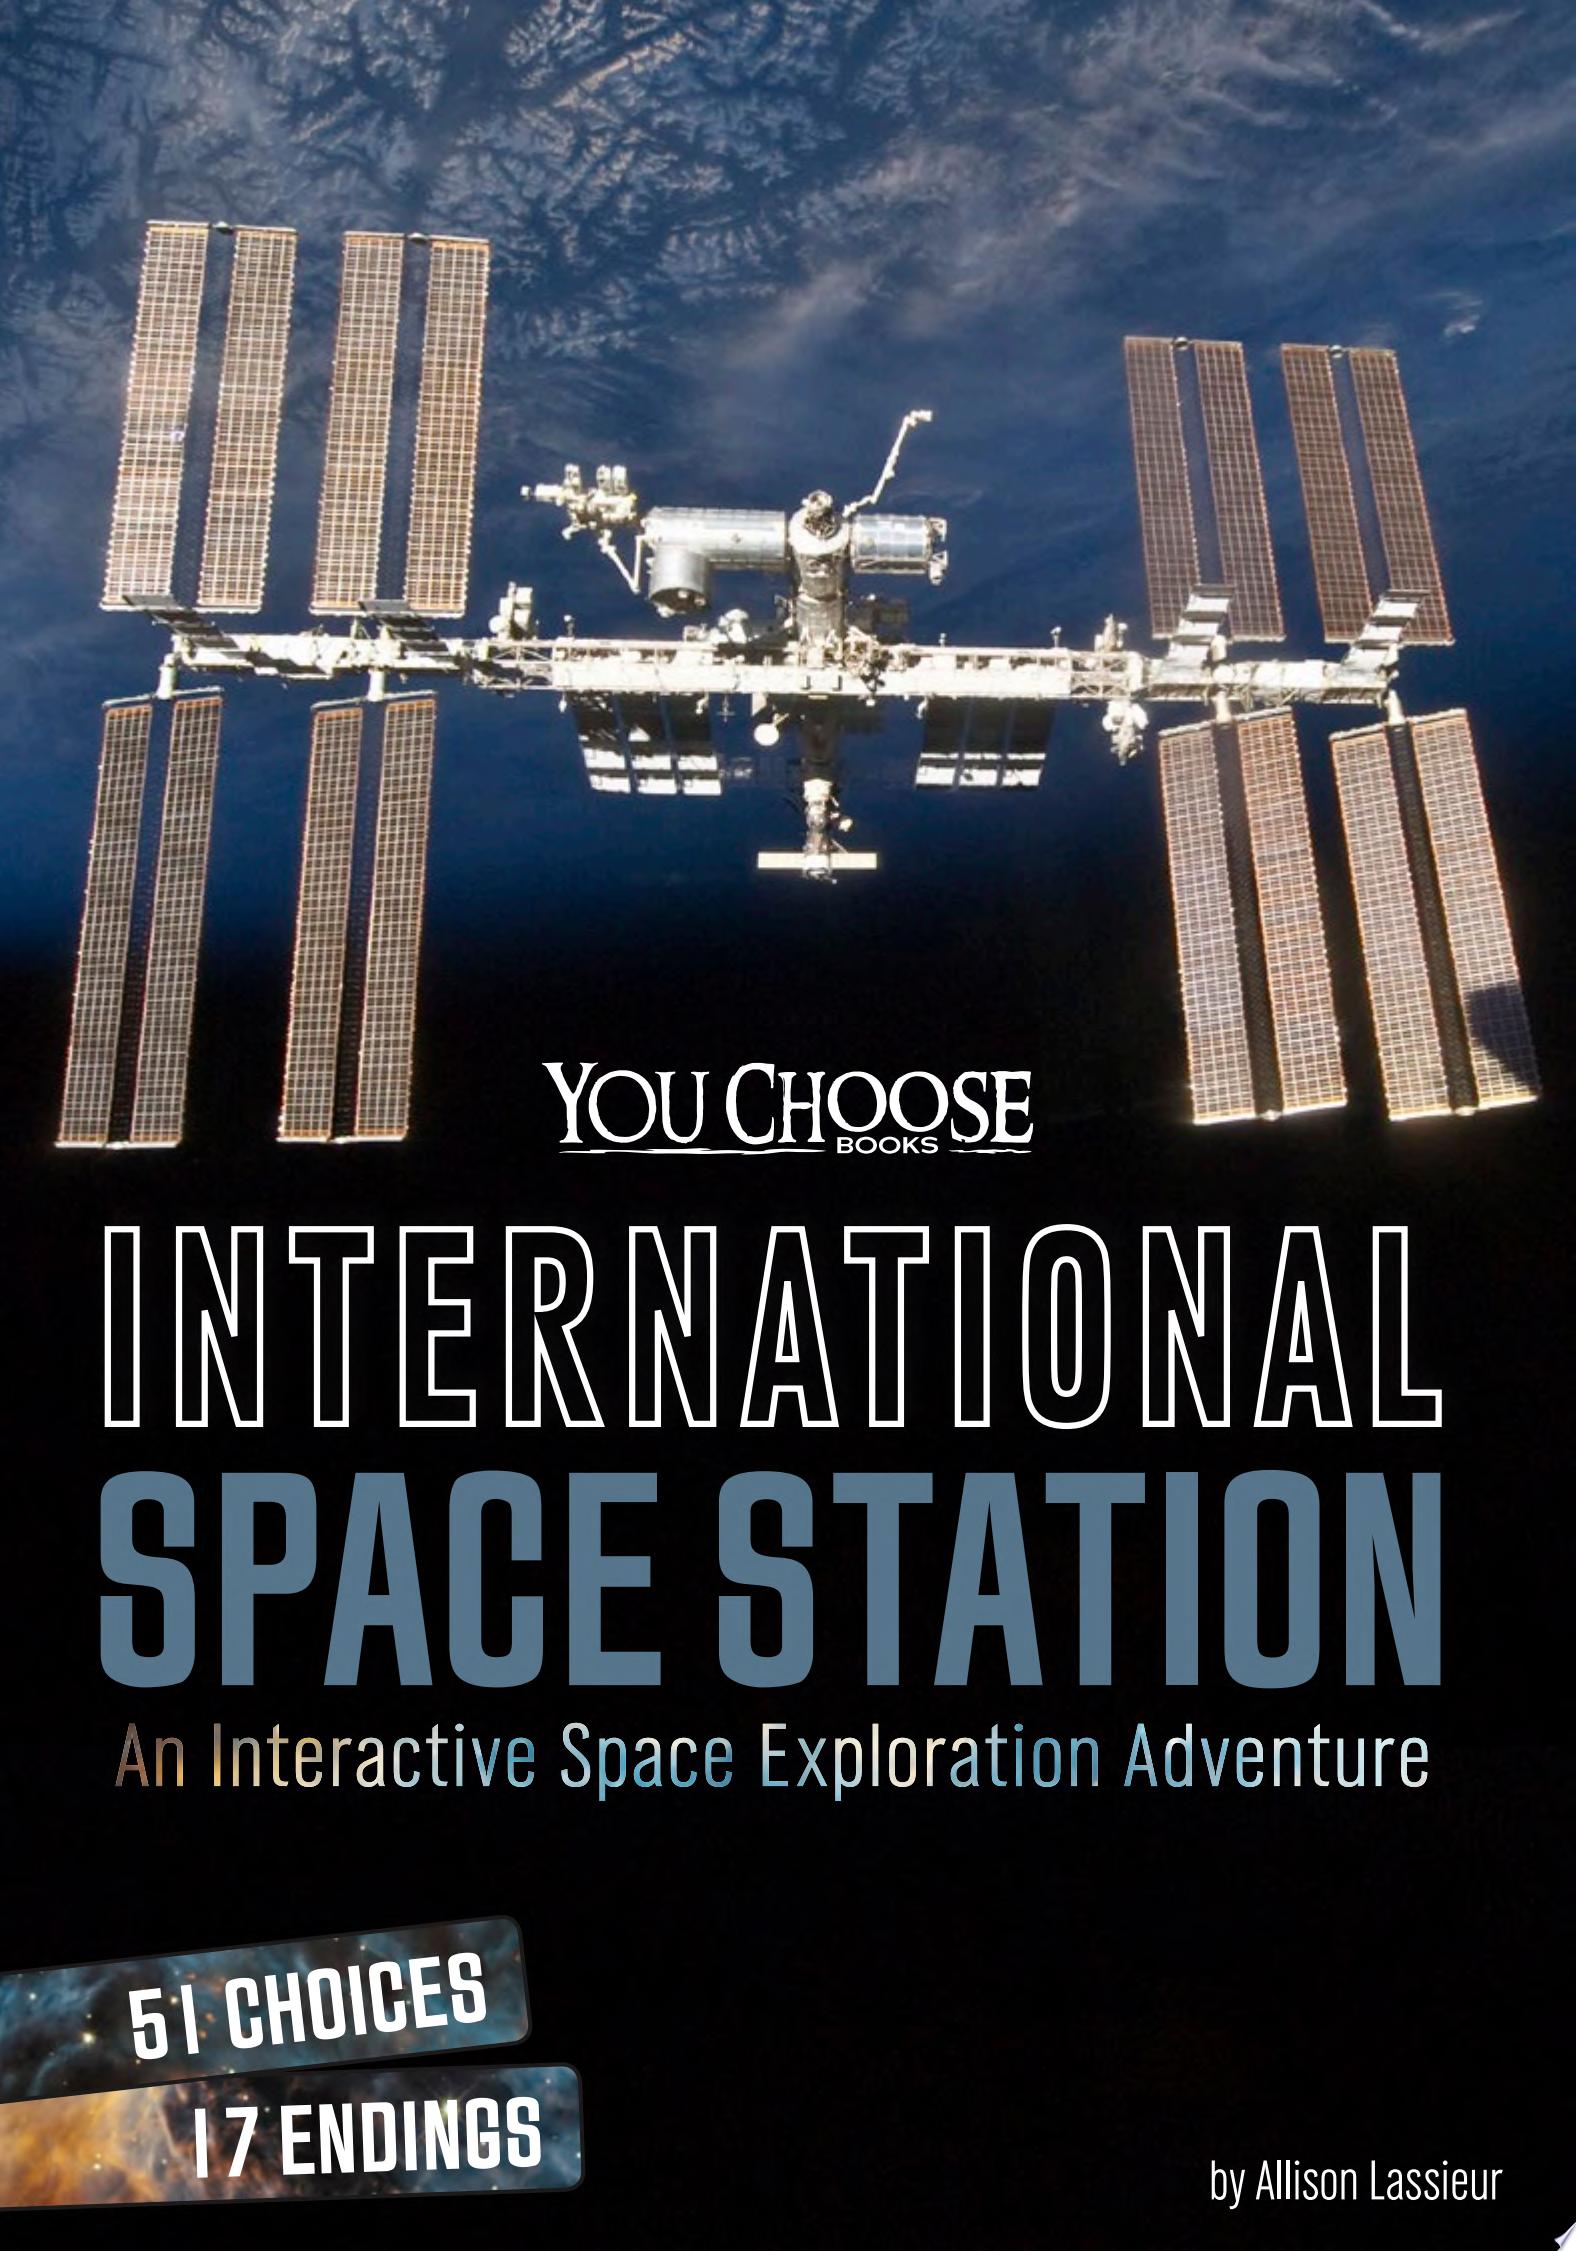 Image for "International Space Station"